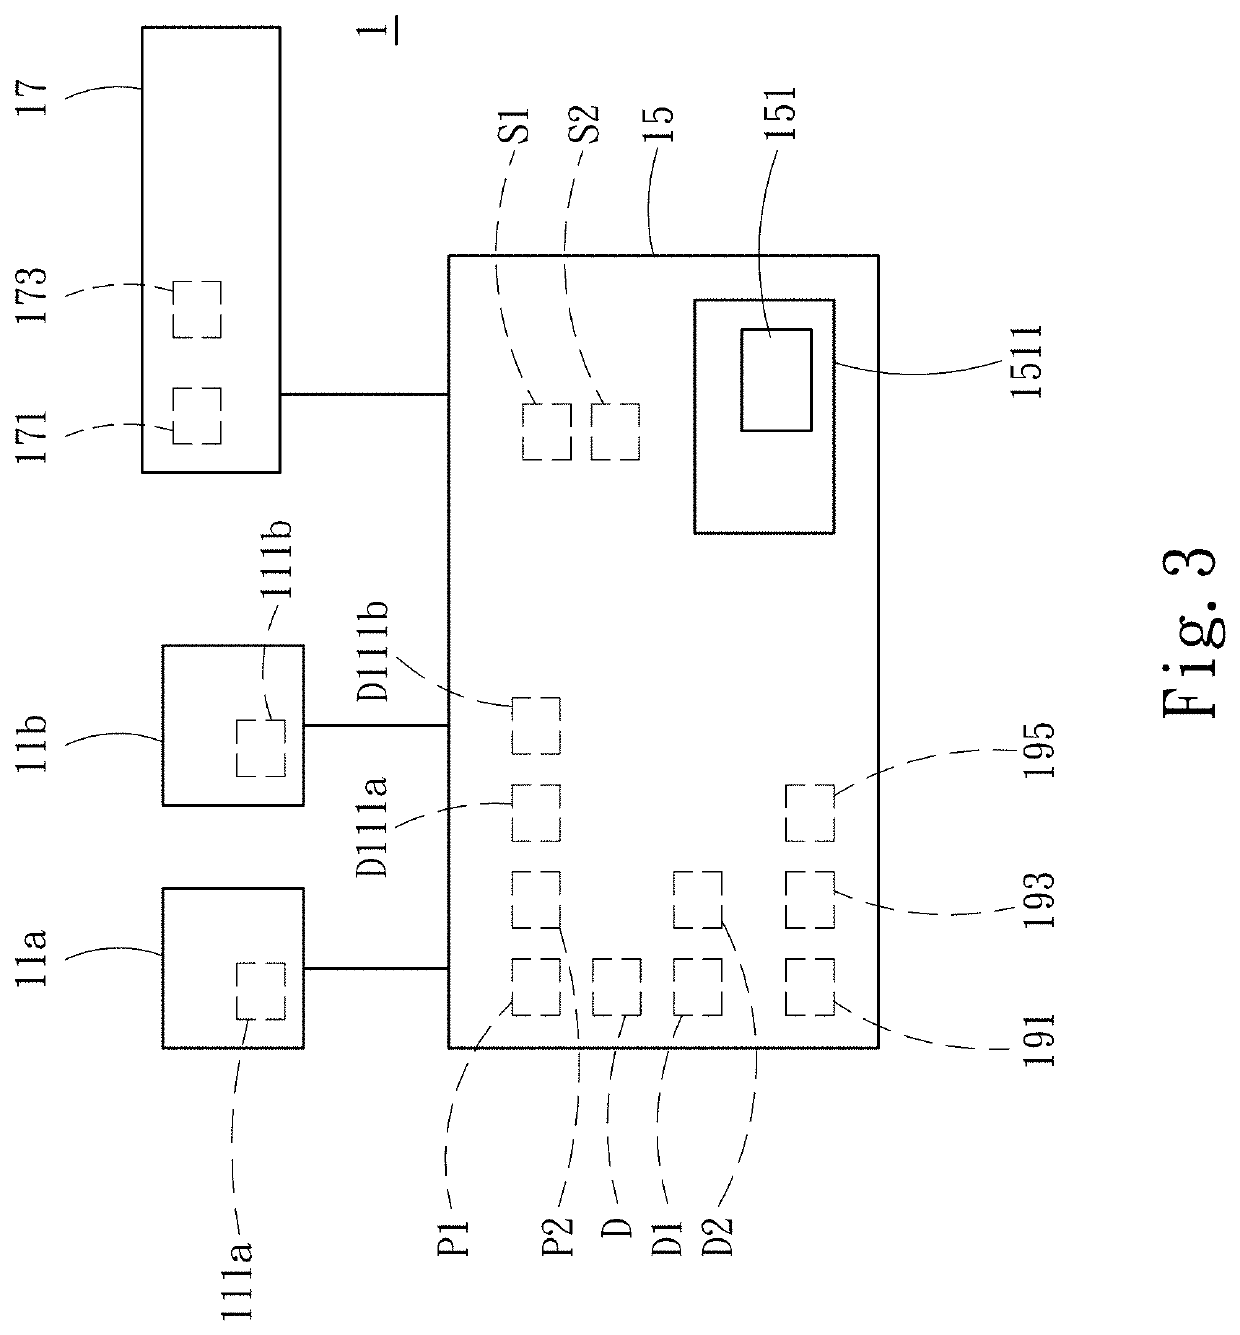 Dynamic monitoring system with radio-frequency identification